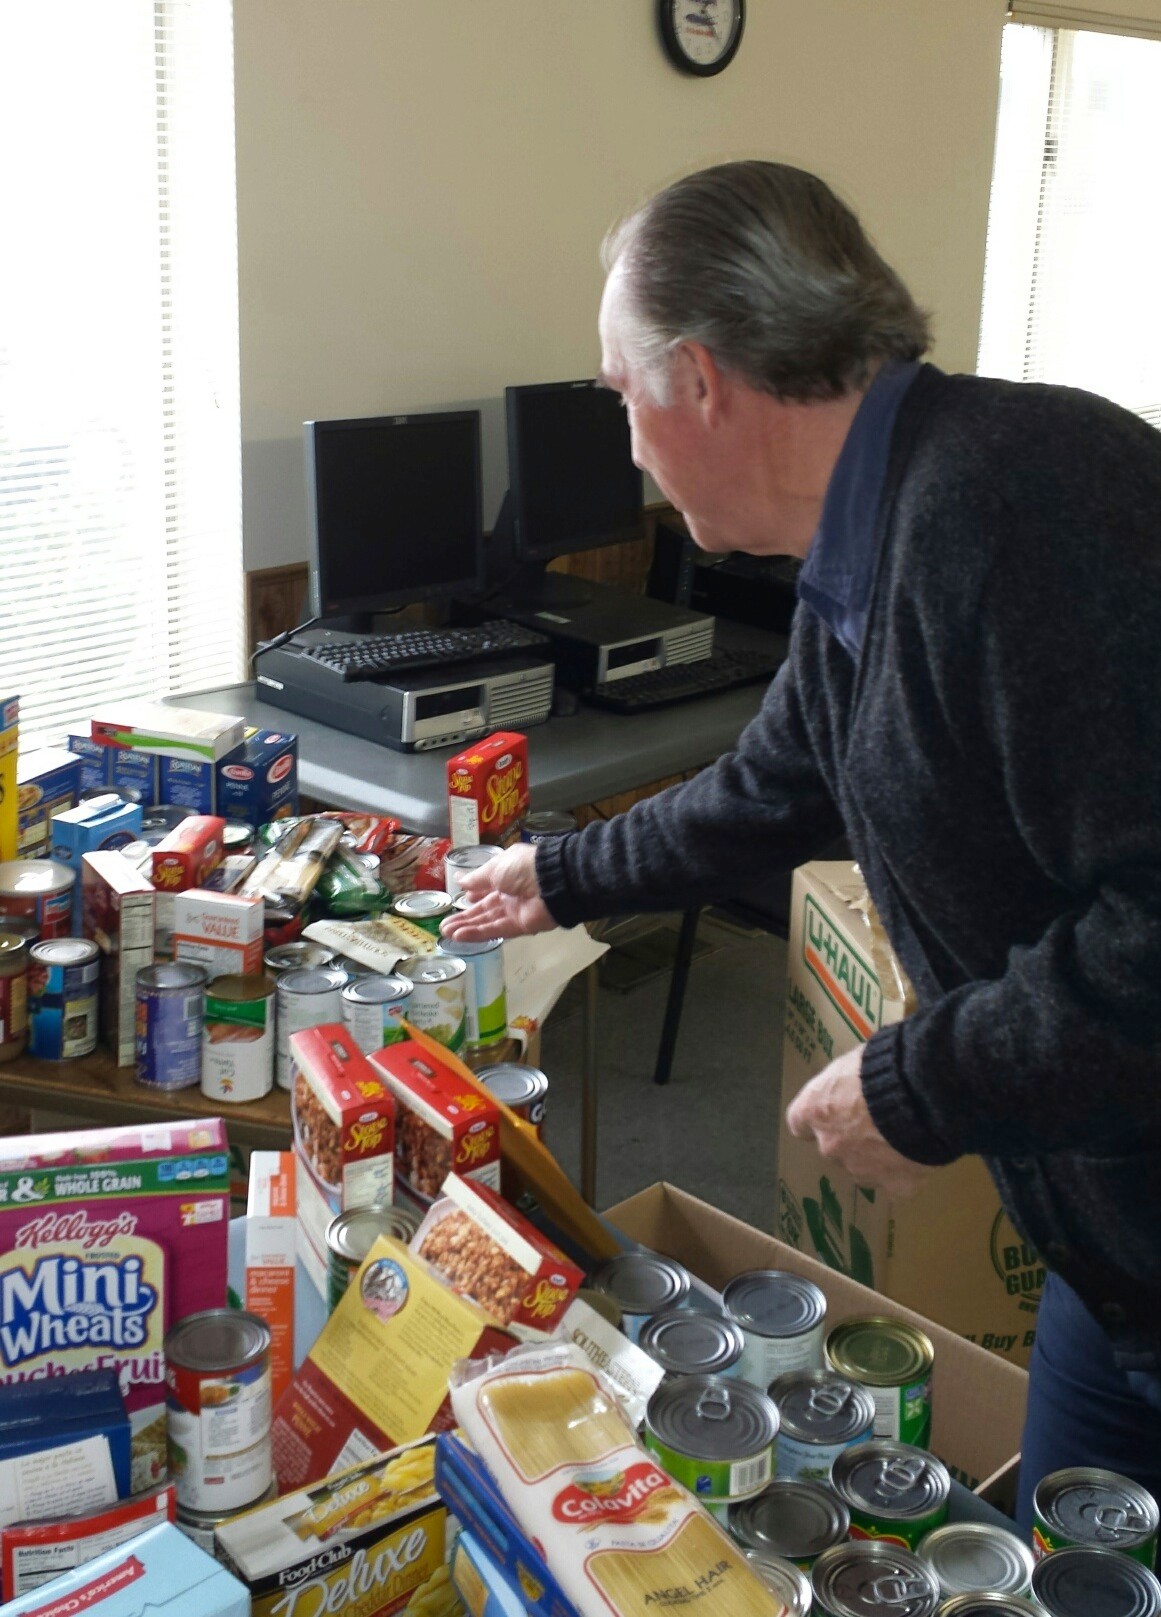 Compagnoni sorted the food items at the Senior Center in East Rockaway.